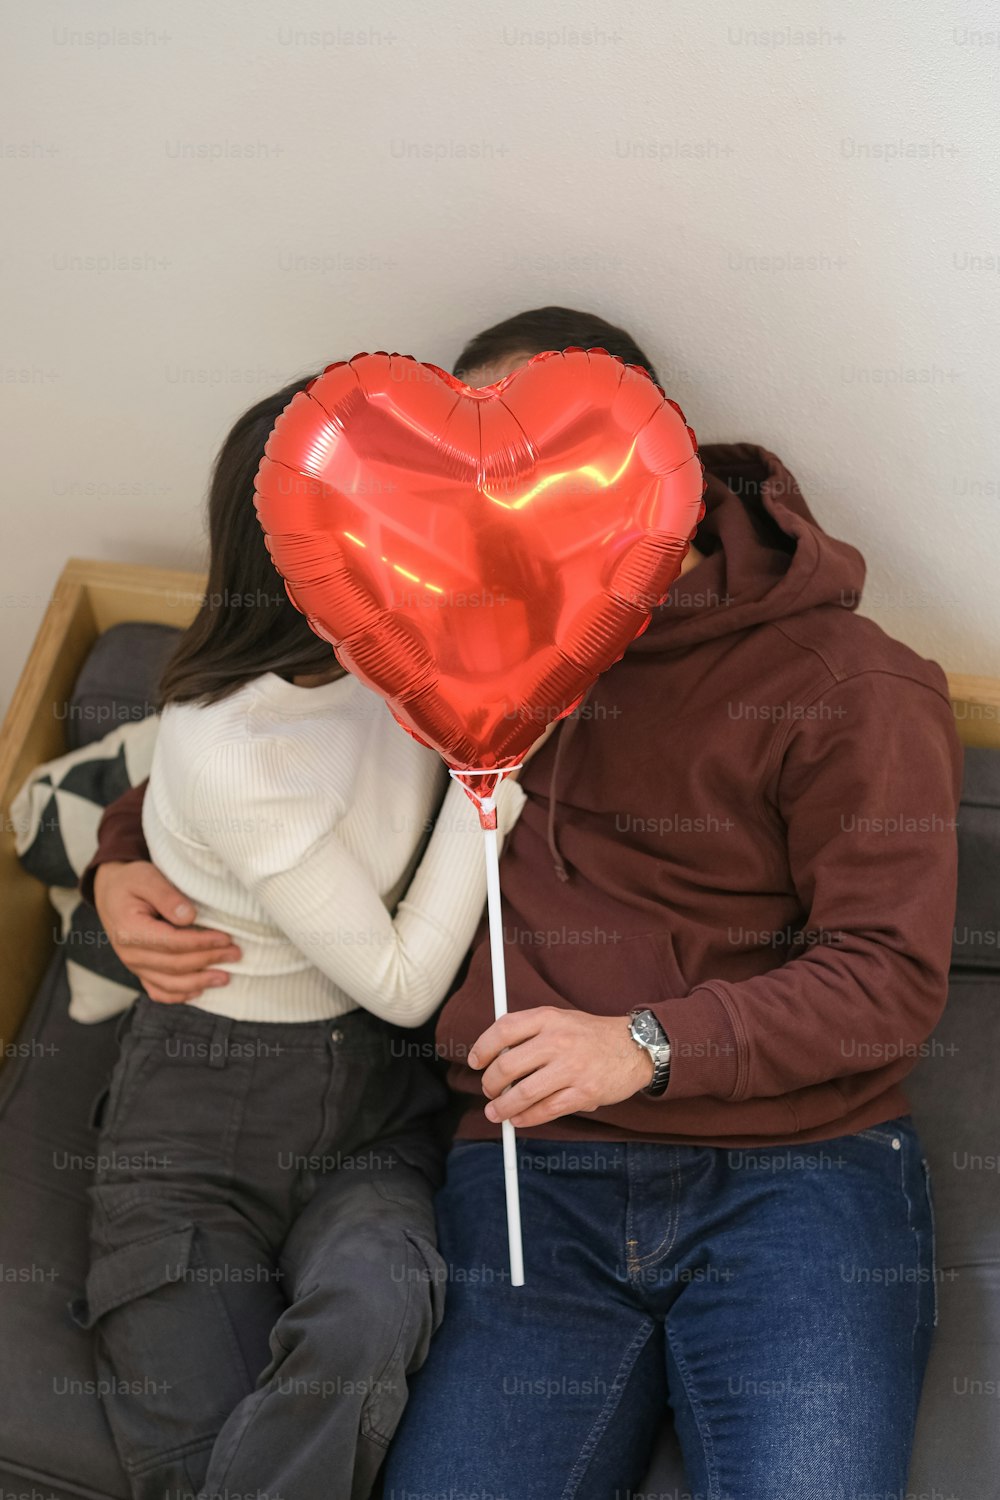 a man and woman sitting on a couch with a heart shaped balloon